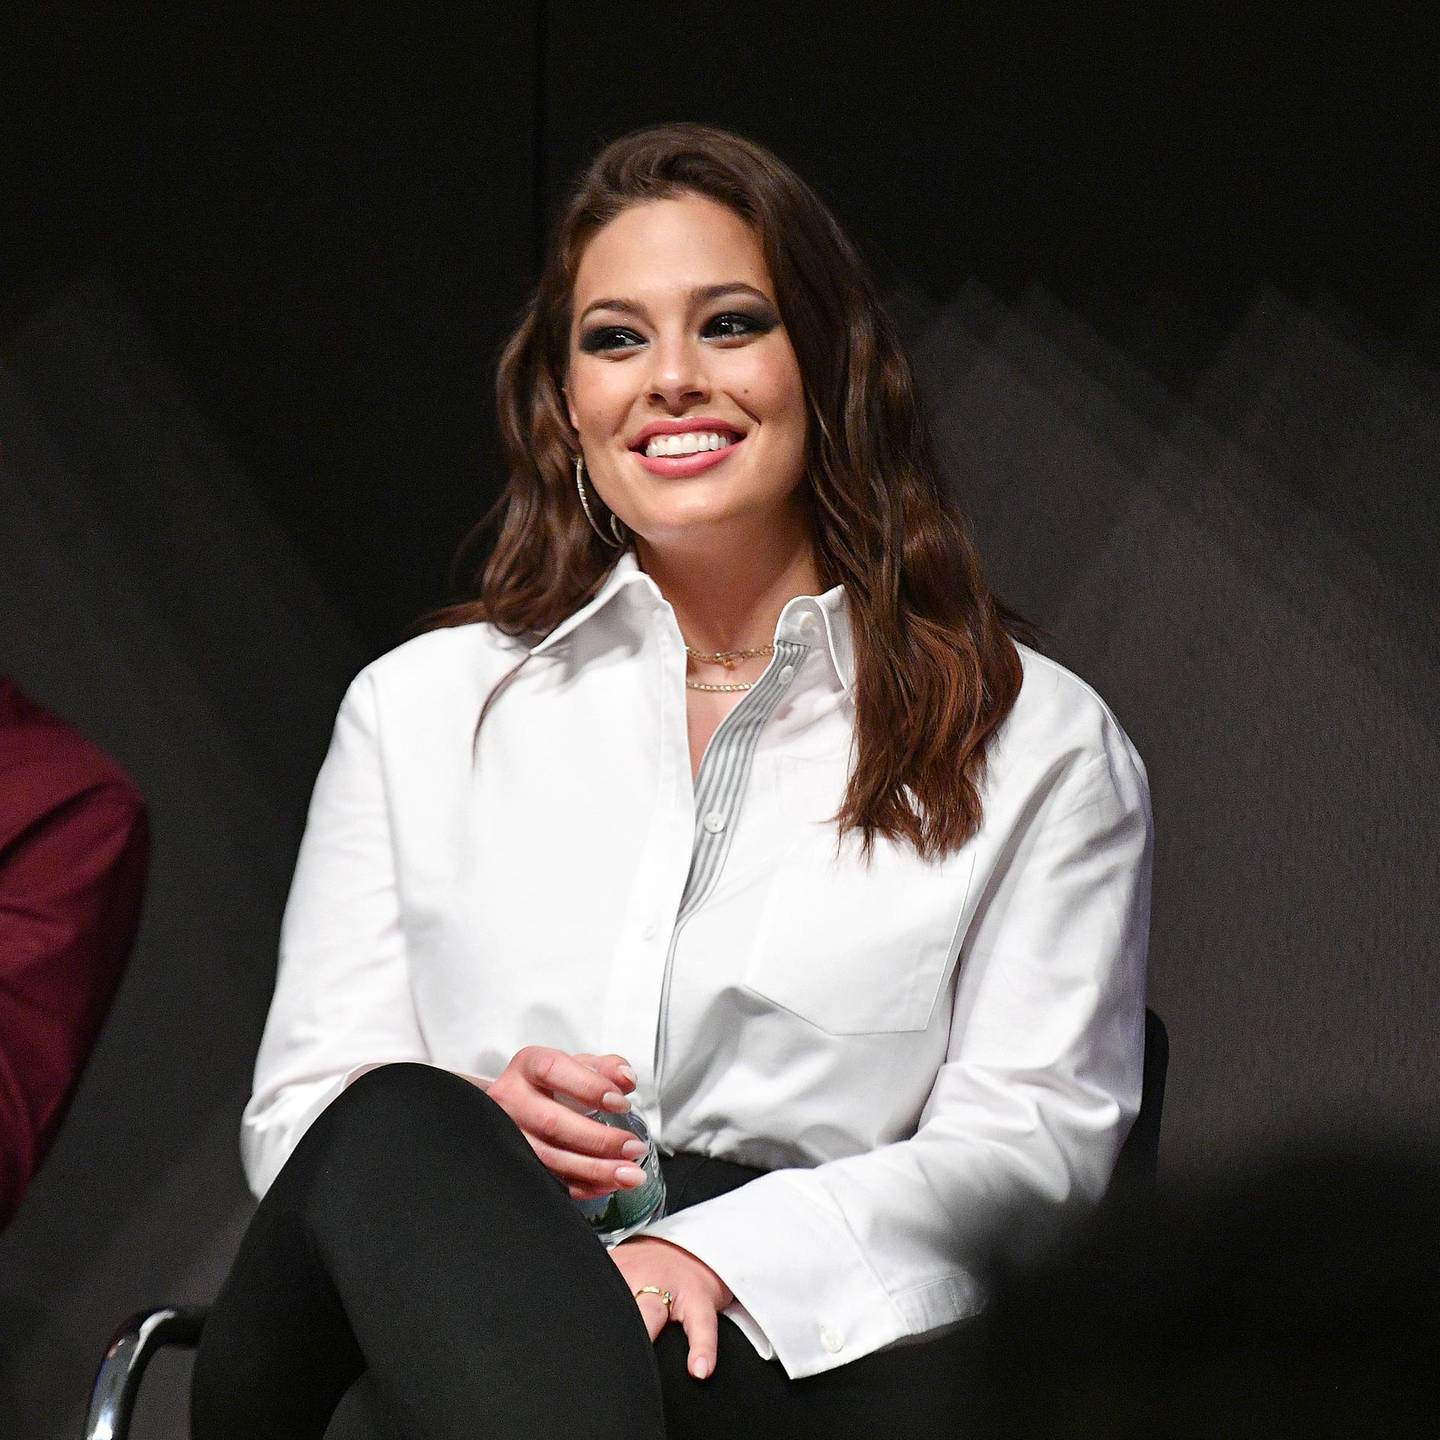 NEW YORK, NEW YORK - JANUARY 17: Ashley Graham attends Cocktails and a Conversation with the Stars of Lifetime's "American Beauty Star" featuring host and executive producer Ashley Graham, mentor Sir John and judges Christie Brinkley and Leah Wyar on January 17, 2019 in New York City. (Photo by Dia Dipasupil/Getty Images for Lifetime)